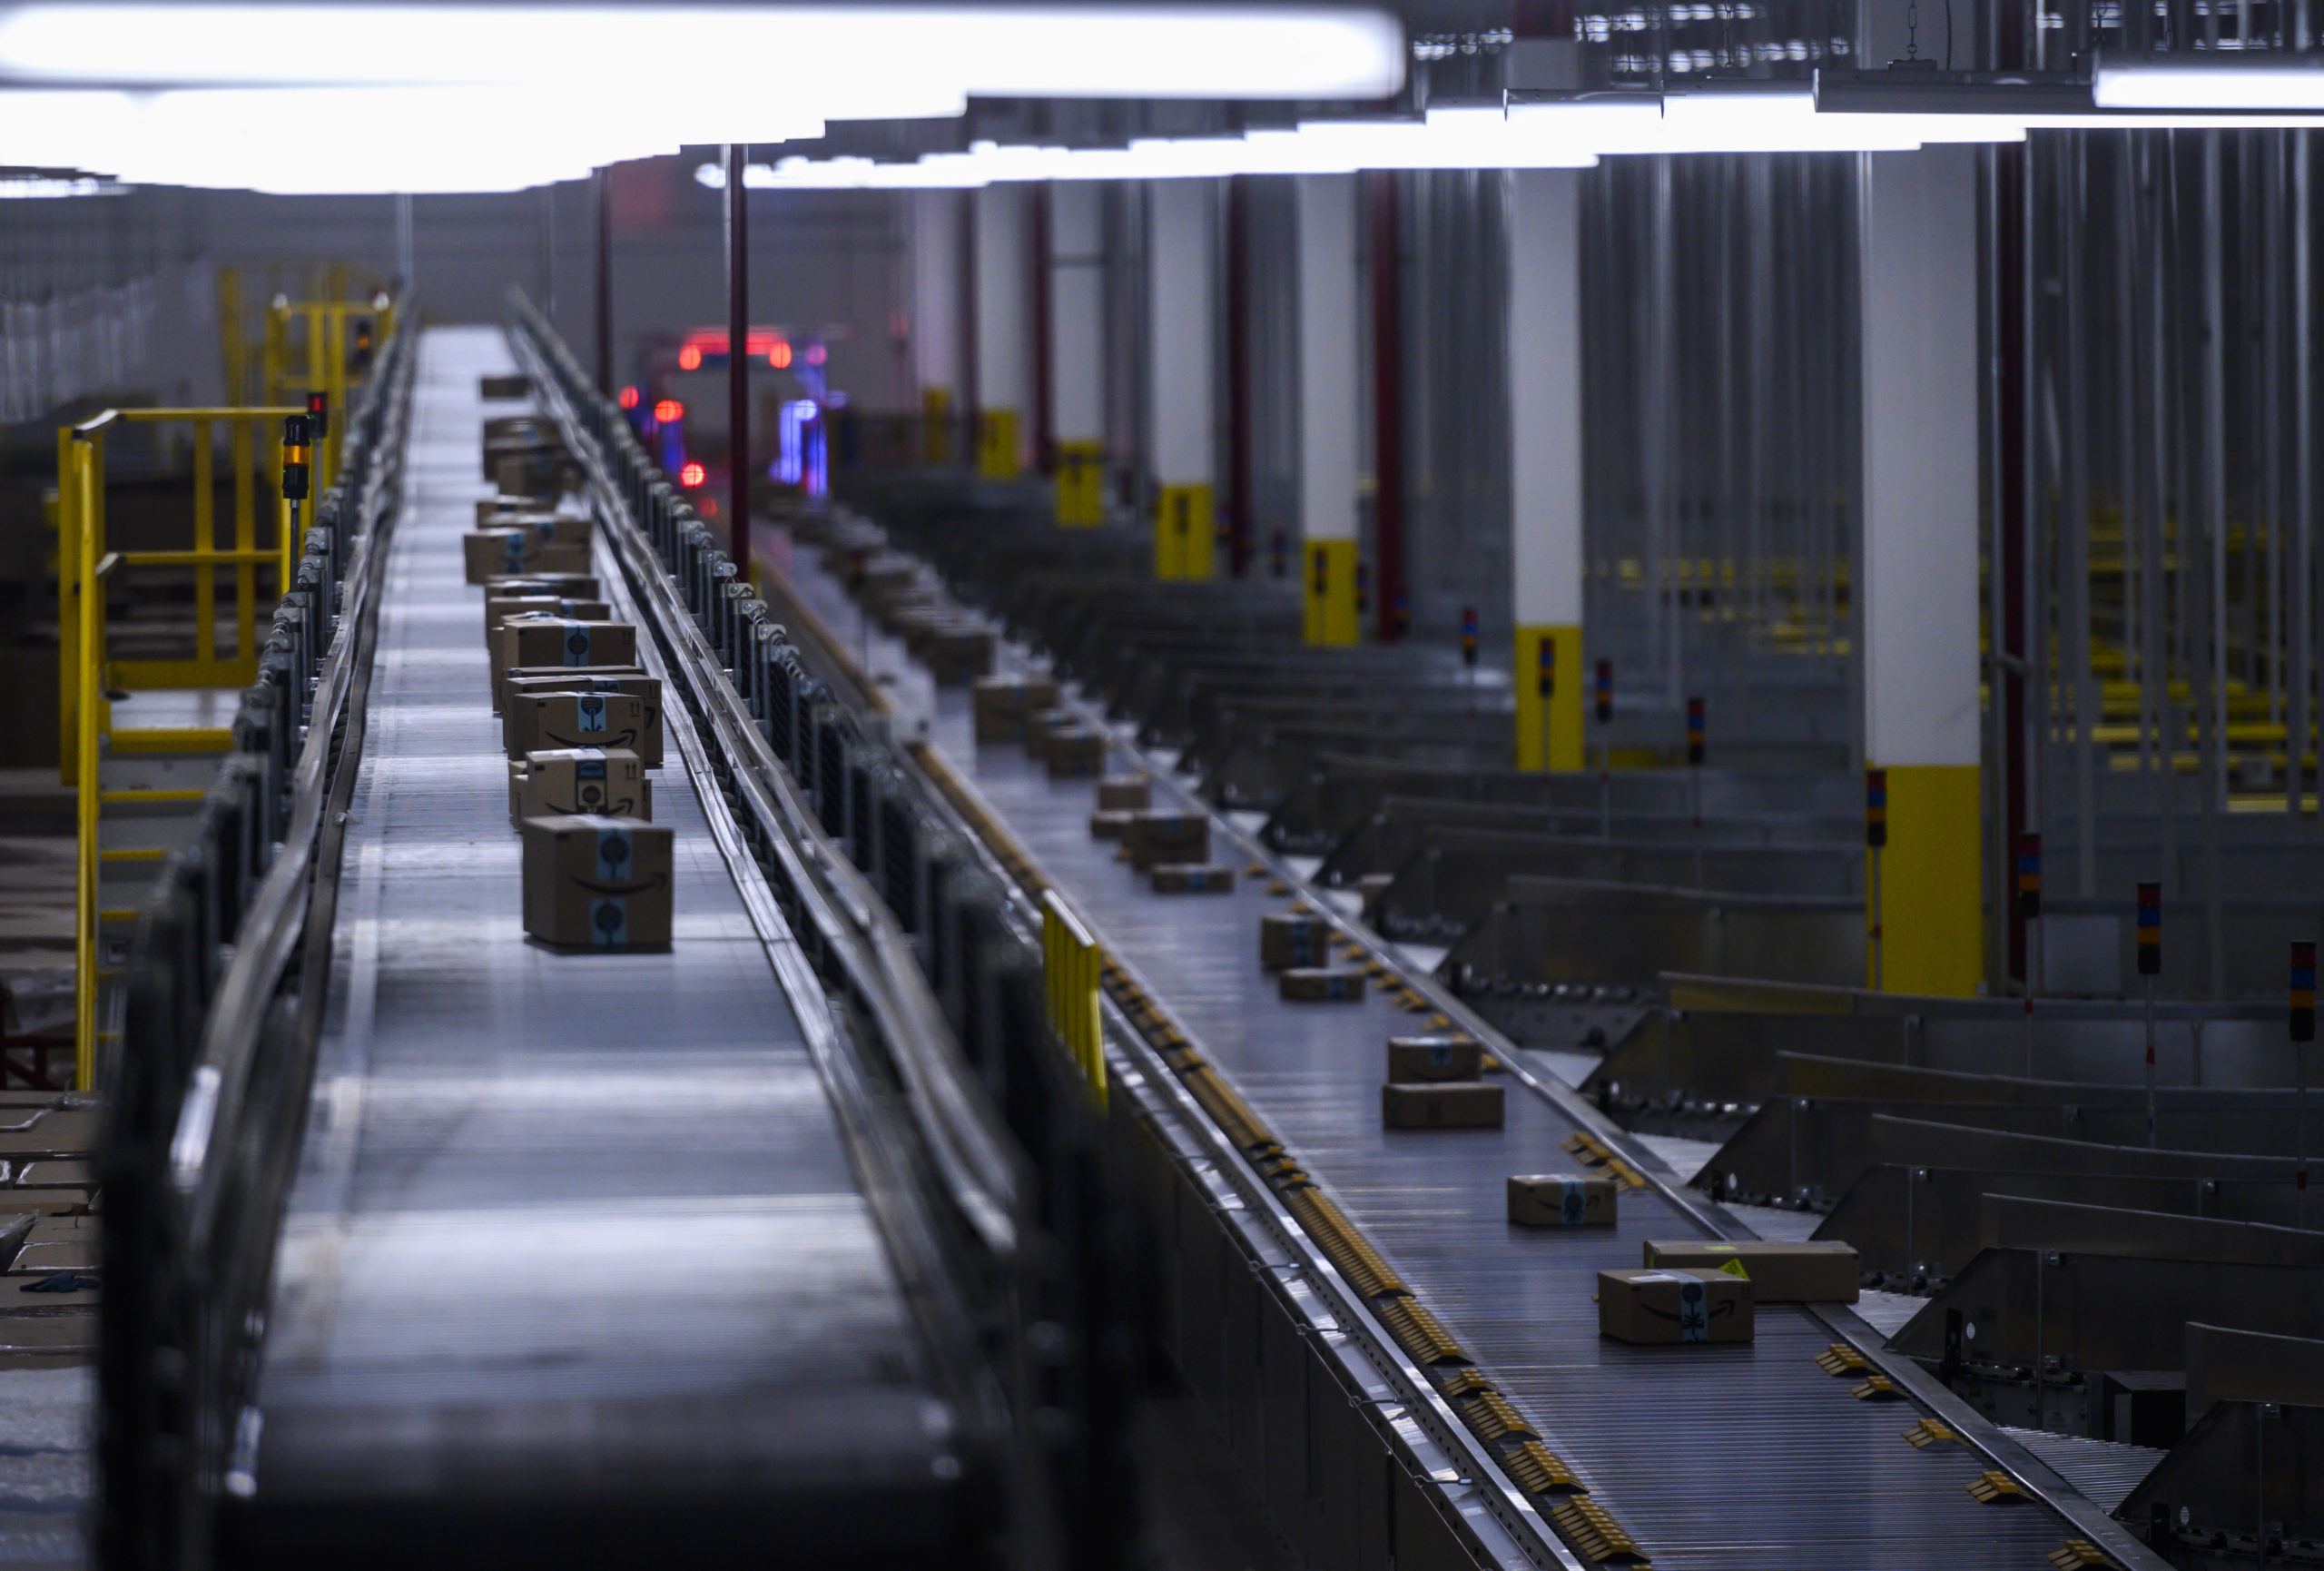 Orders move down a conveyor belt at the Amazon fulfillment center in Staten Island. (Johannes Eisele/AFP via Getty Images)